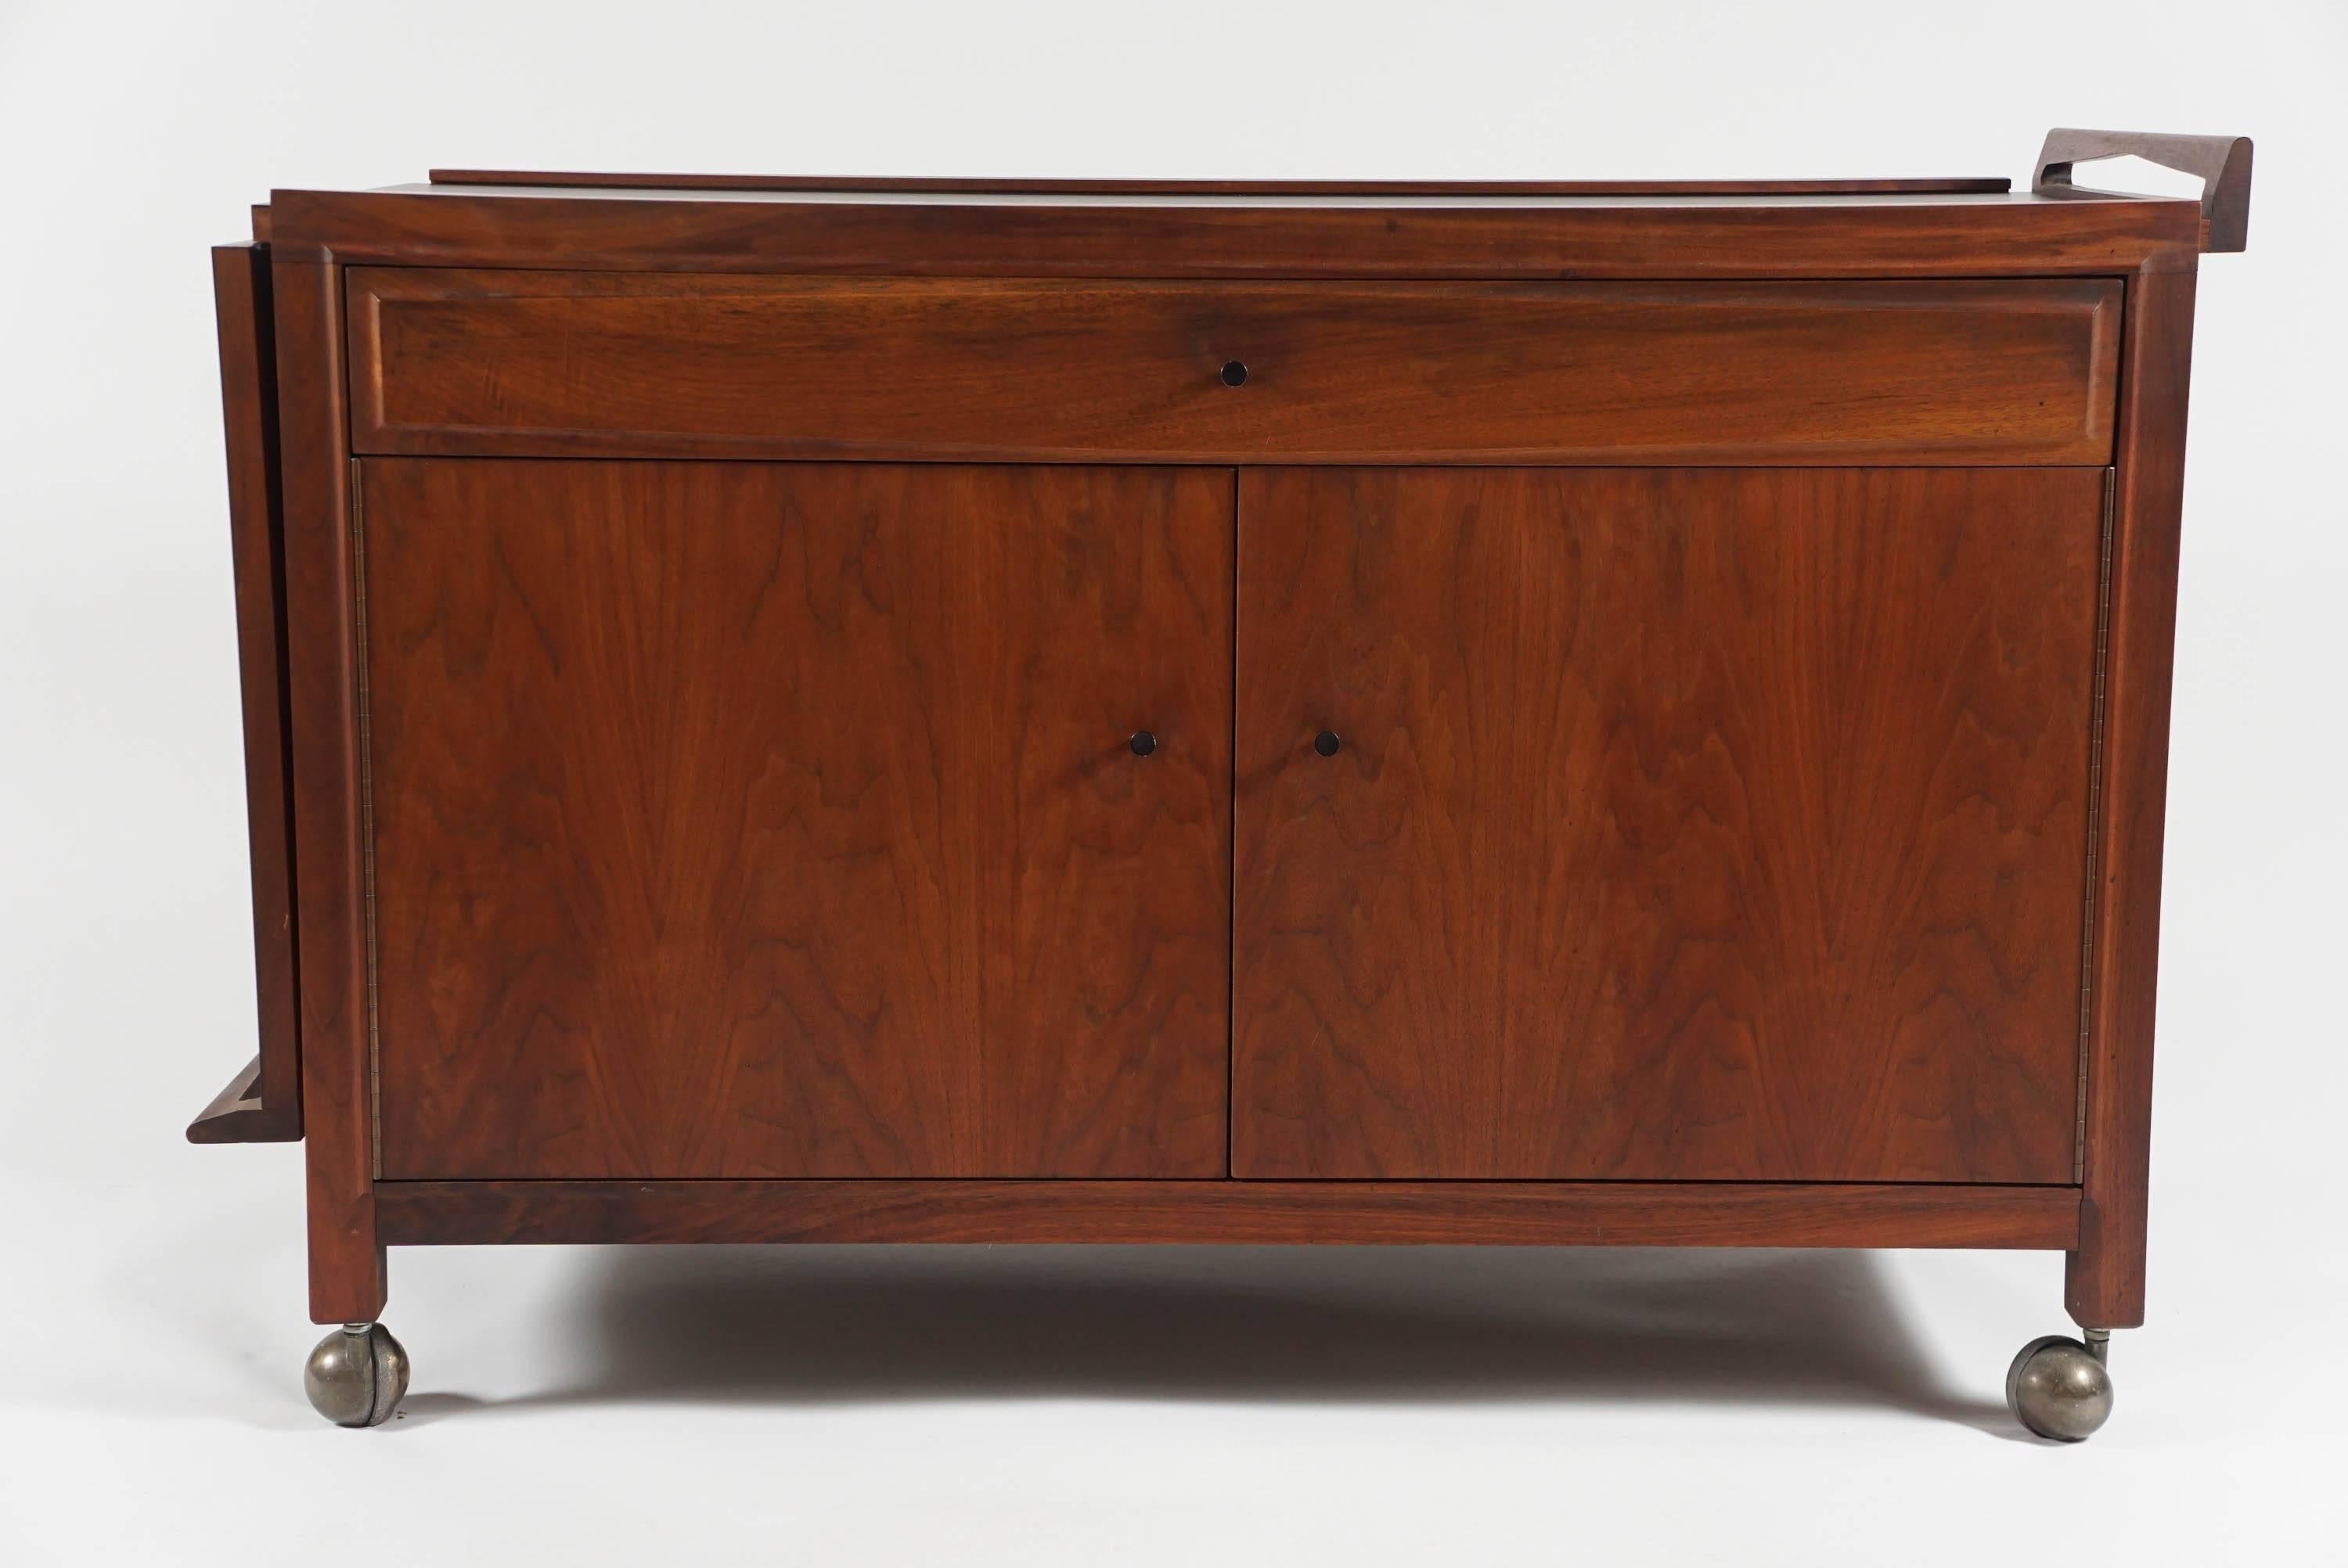 Mid-Century bar/Credenza with expandable top in walnut and black laminate.
Very clean lines and sculptural finger hold detail at both ends of the top. It has caster feet for easy moving. The top expands from 41